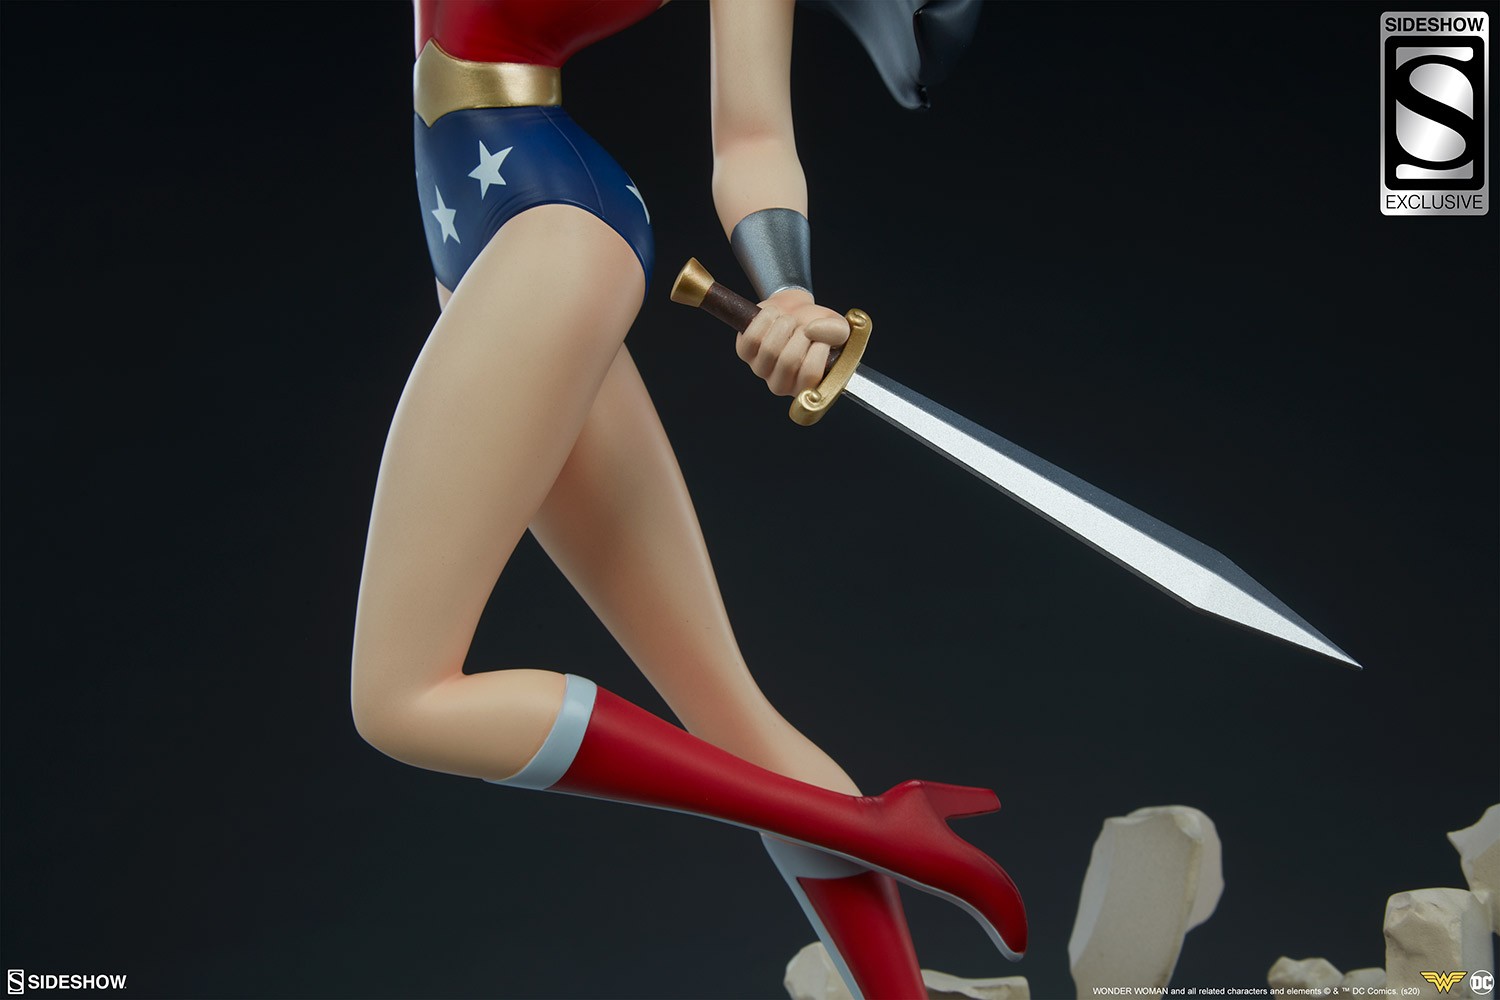 Wonder Woman Exclusive Edition View 2